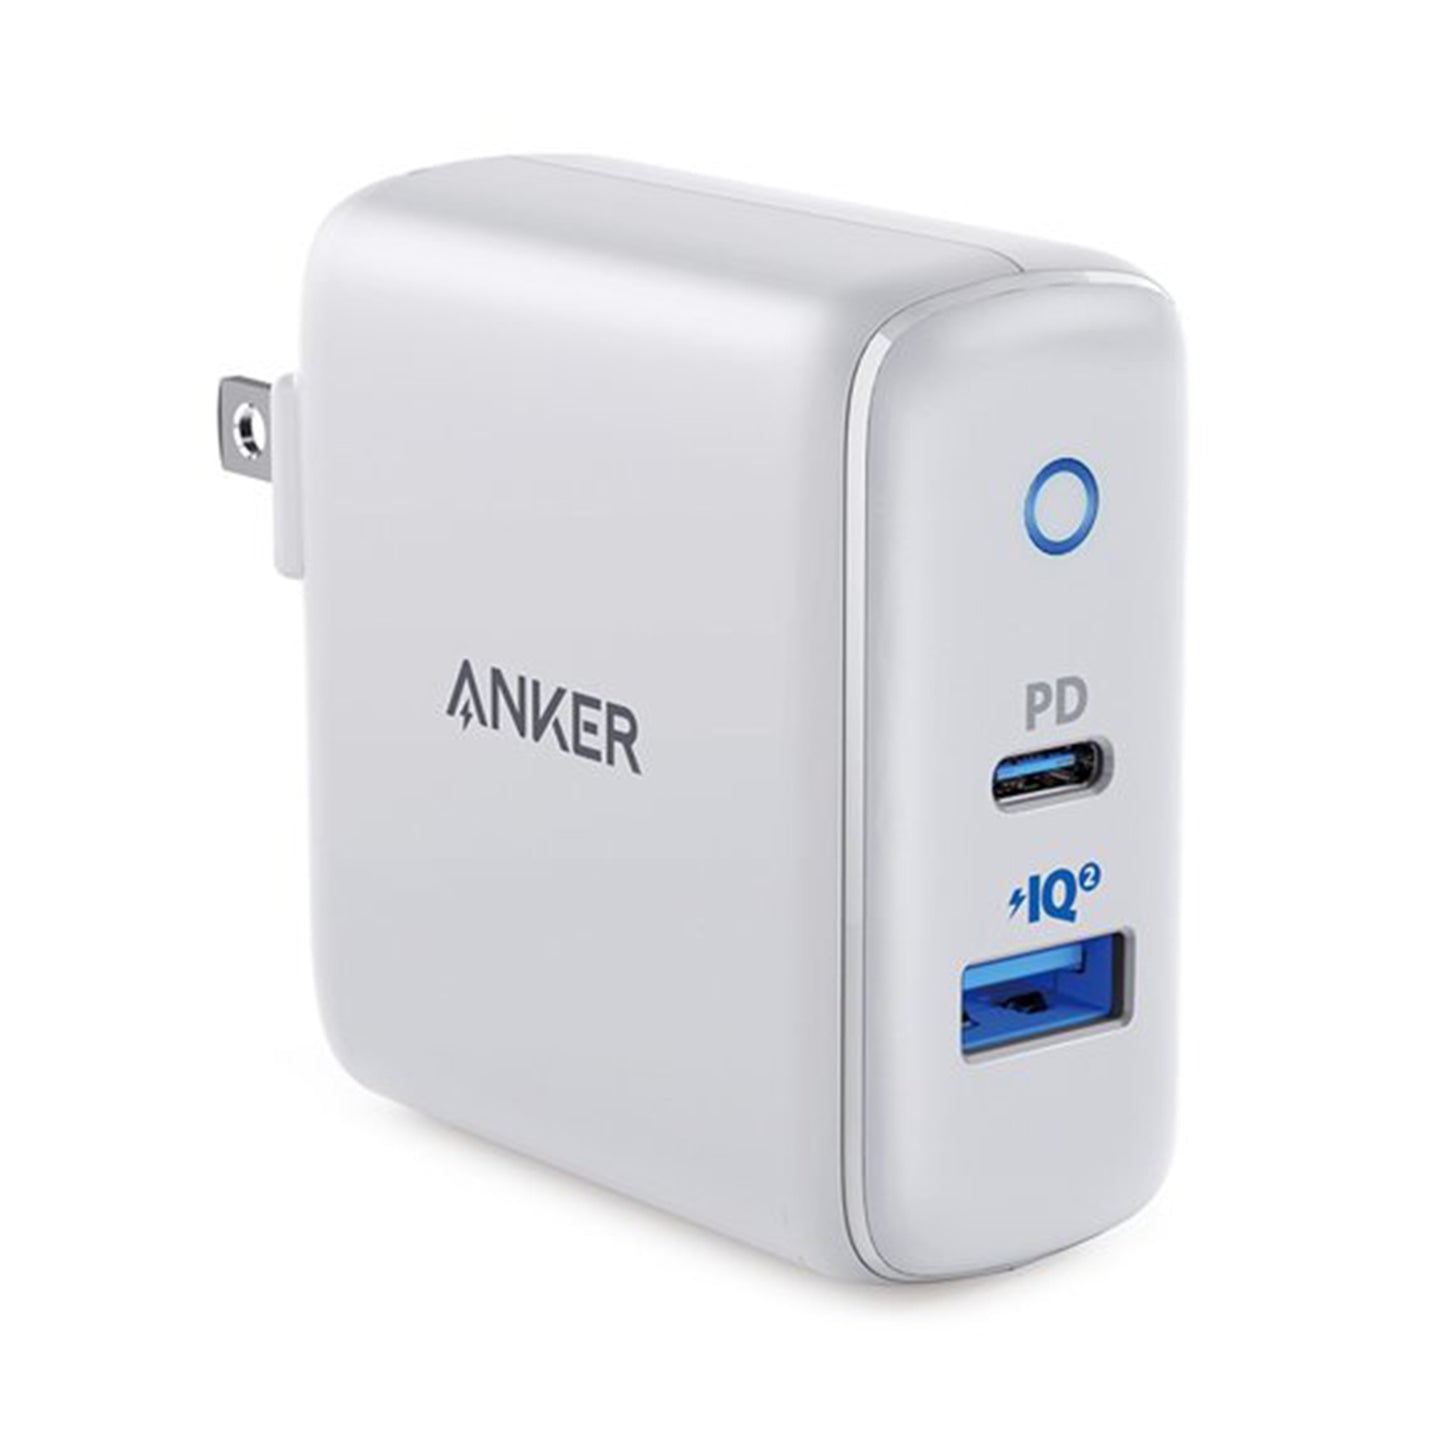 ANKER PowerPort PD+2 USB C and A Wall Charger - White